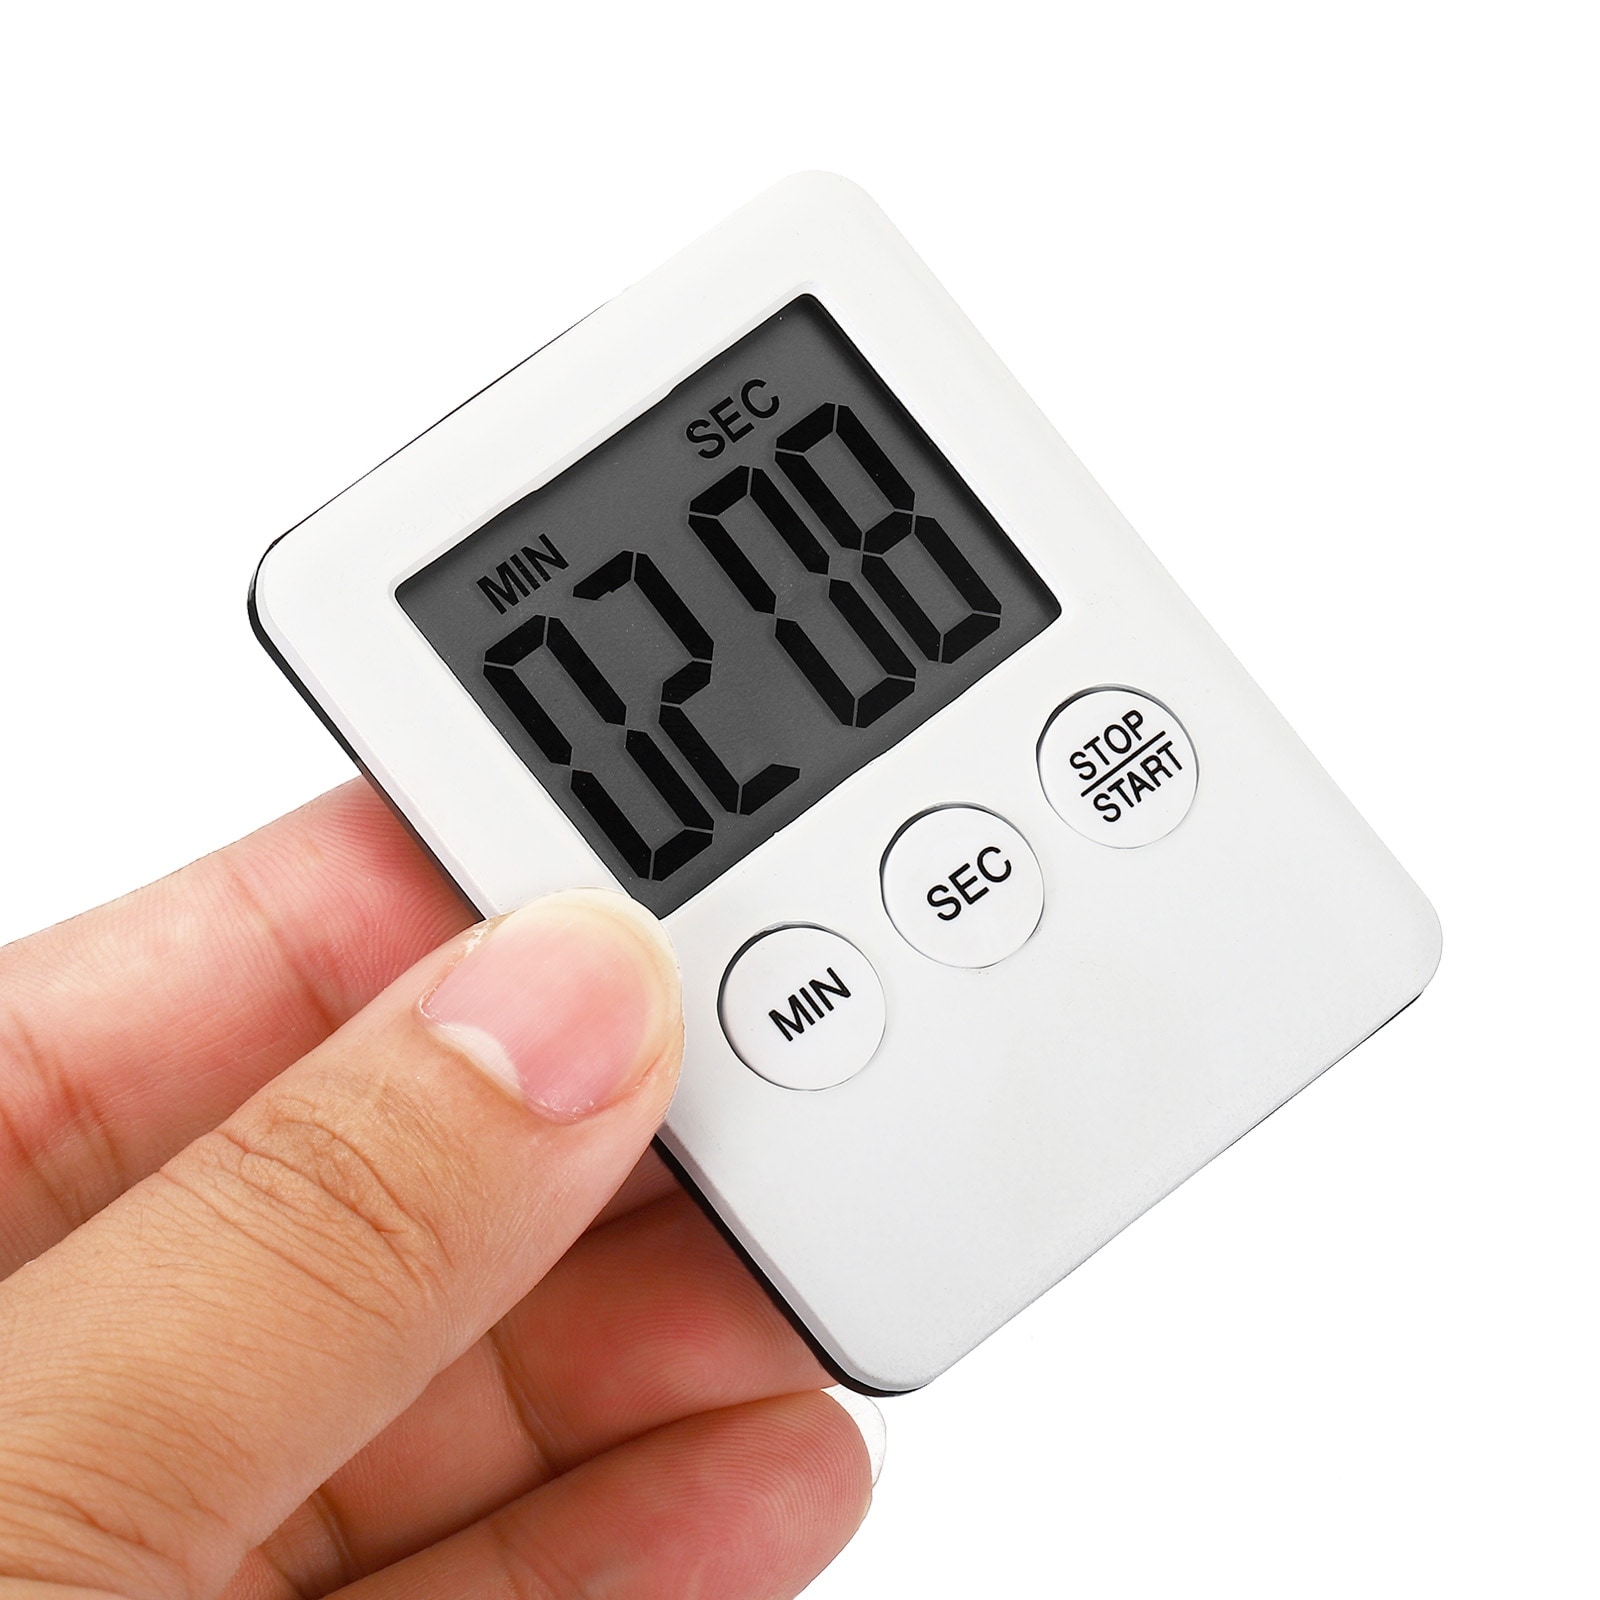 https://ak1.ostkcdn.com/images/products/is/images/direct/a99f20582d2ef2b04fd3000dc406be446eeb576a/Digital-Timer%2C2Pcs-Small-Count-Down-UP-Clock-with-Magnetic%2CKitchen-Timer-White.jpg